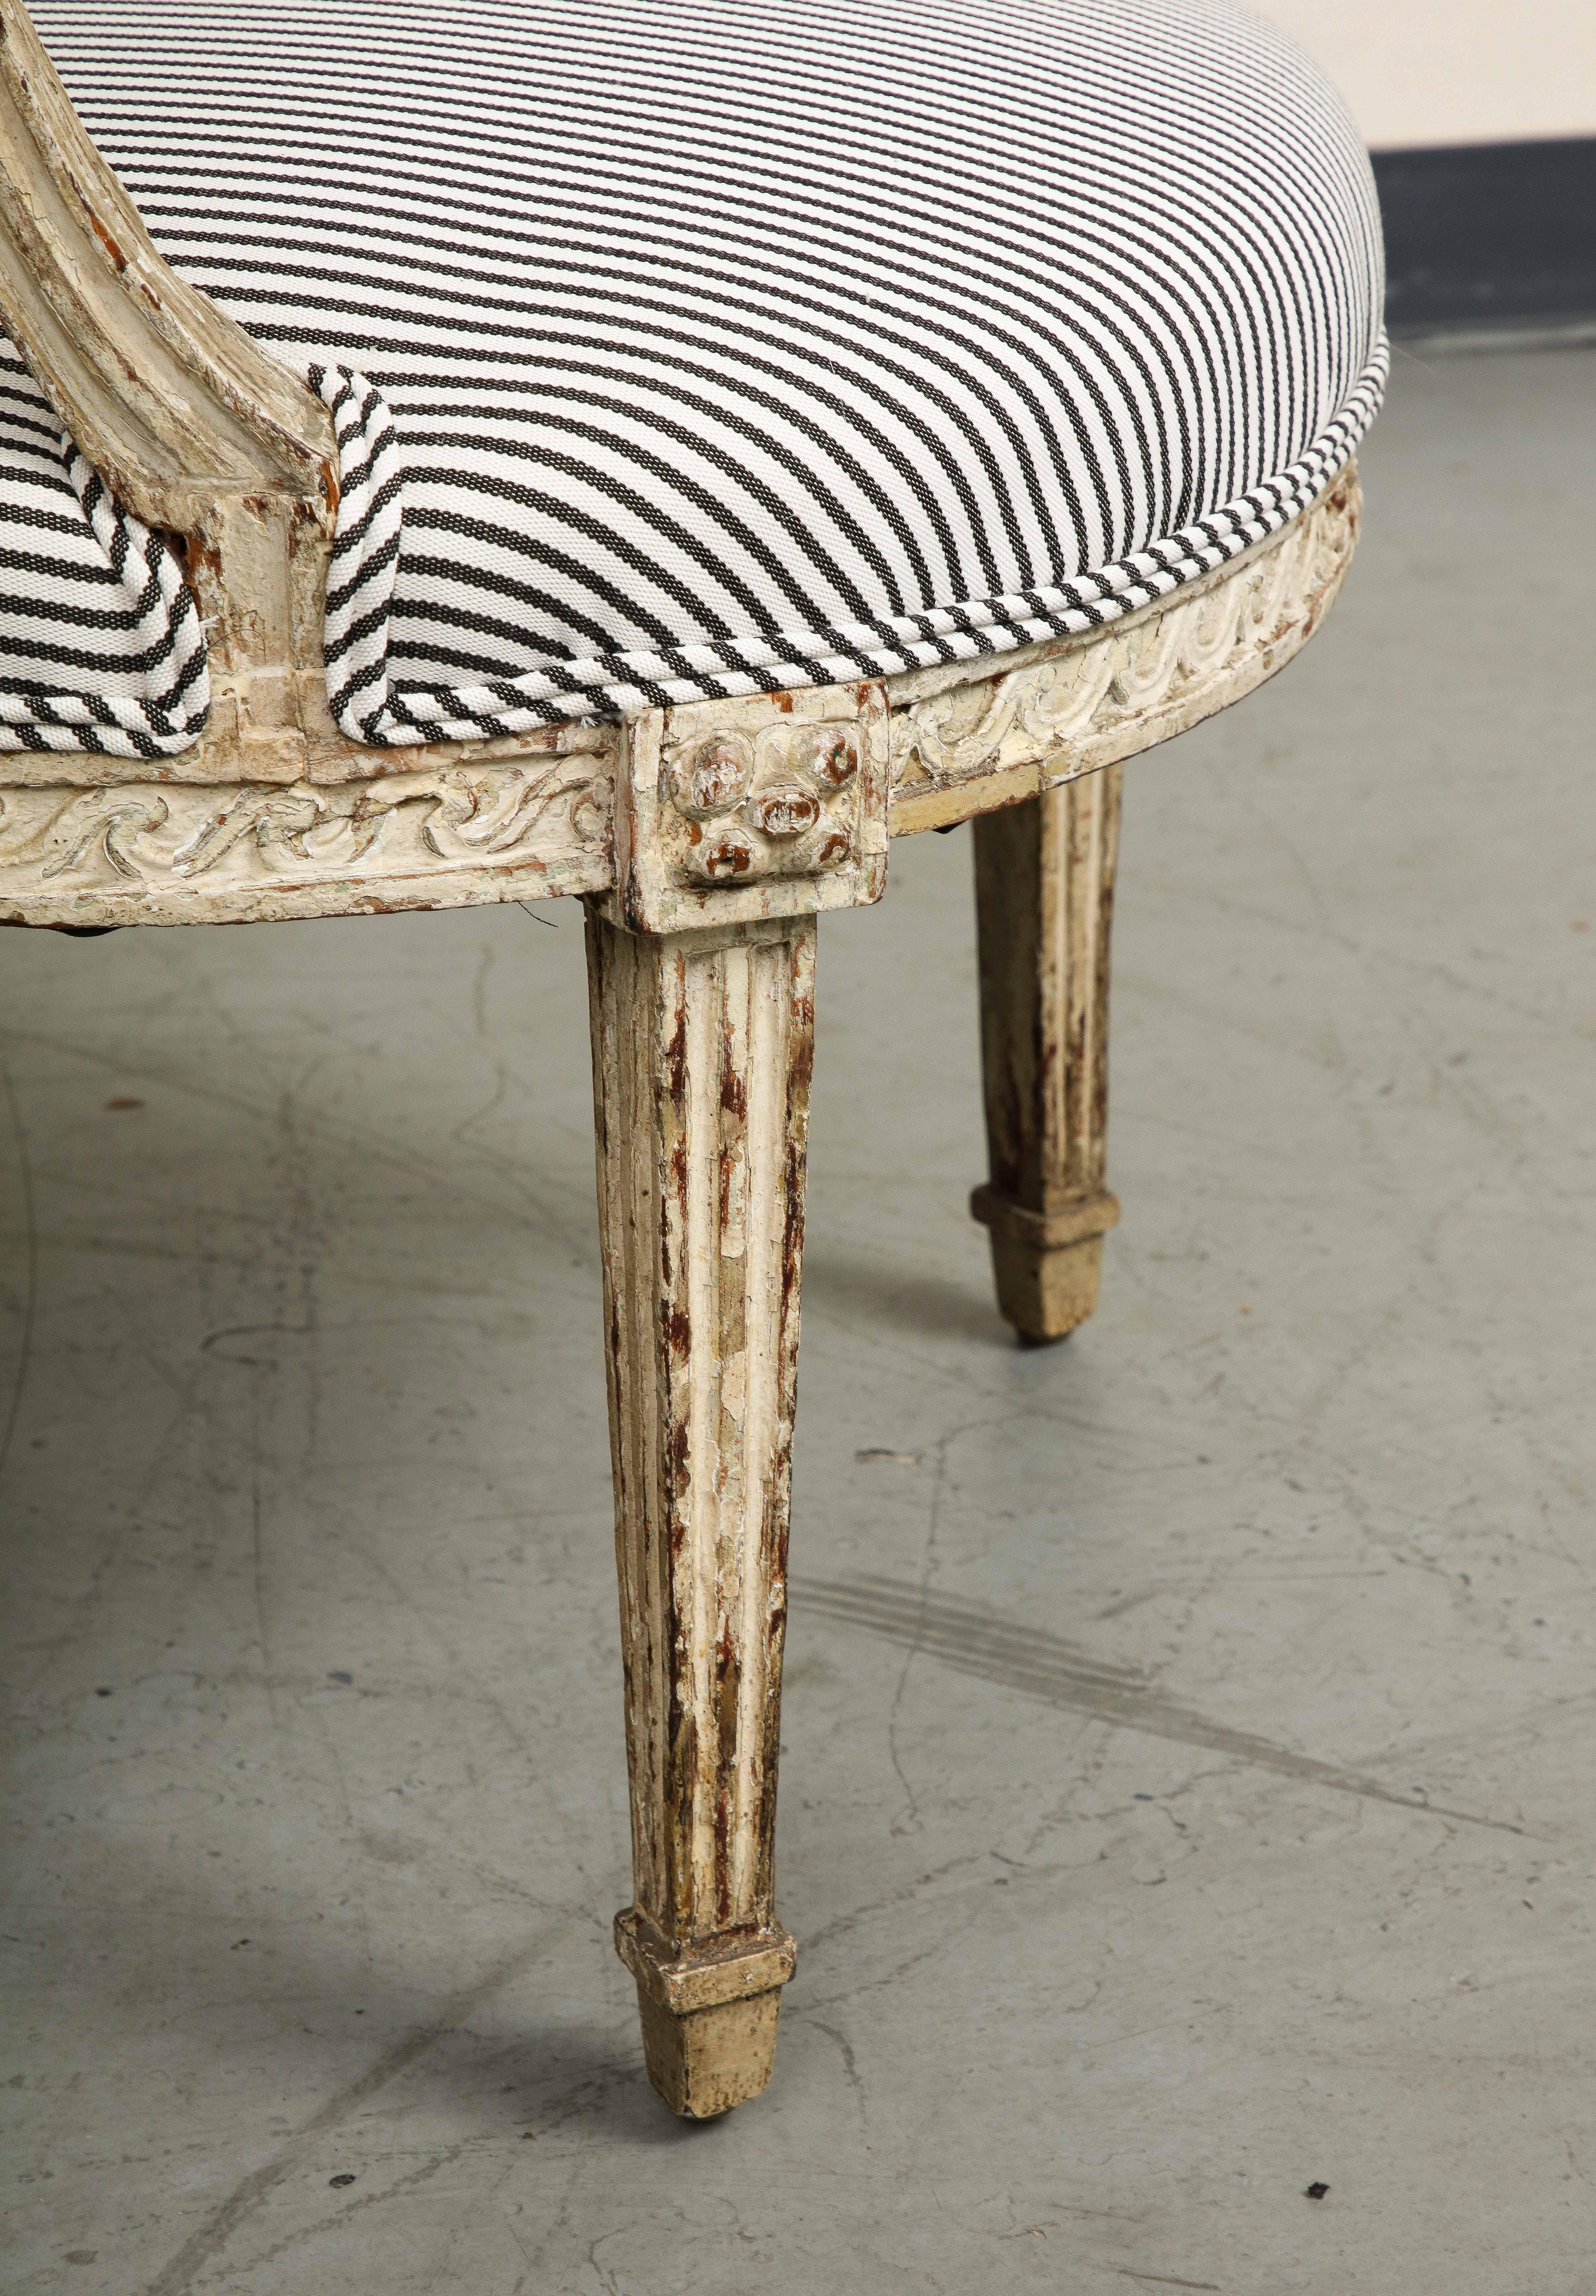 19th Century French Louis XVI Style Fauteuil Chair in Striped Linen Upholstery For Sale 9